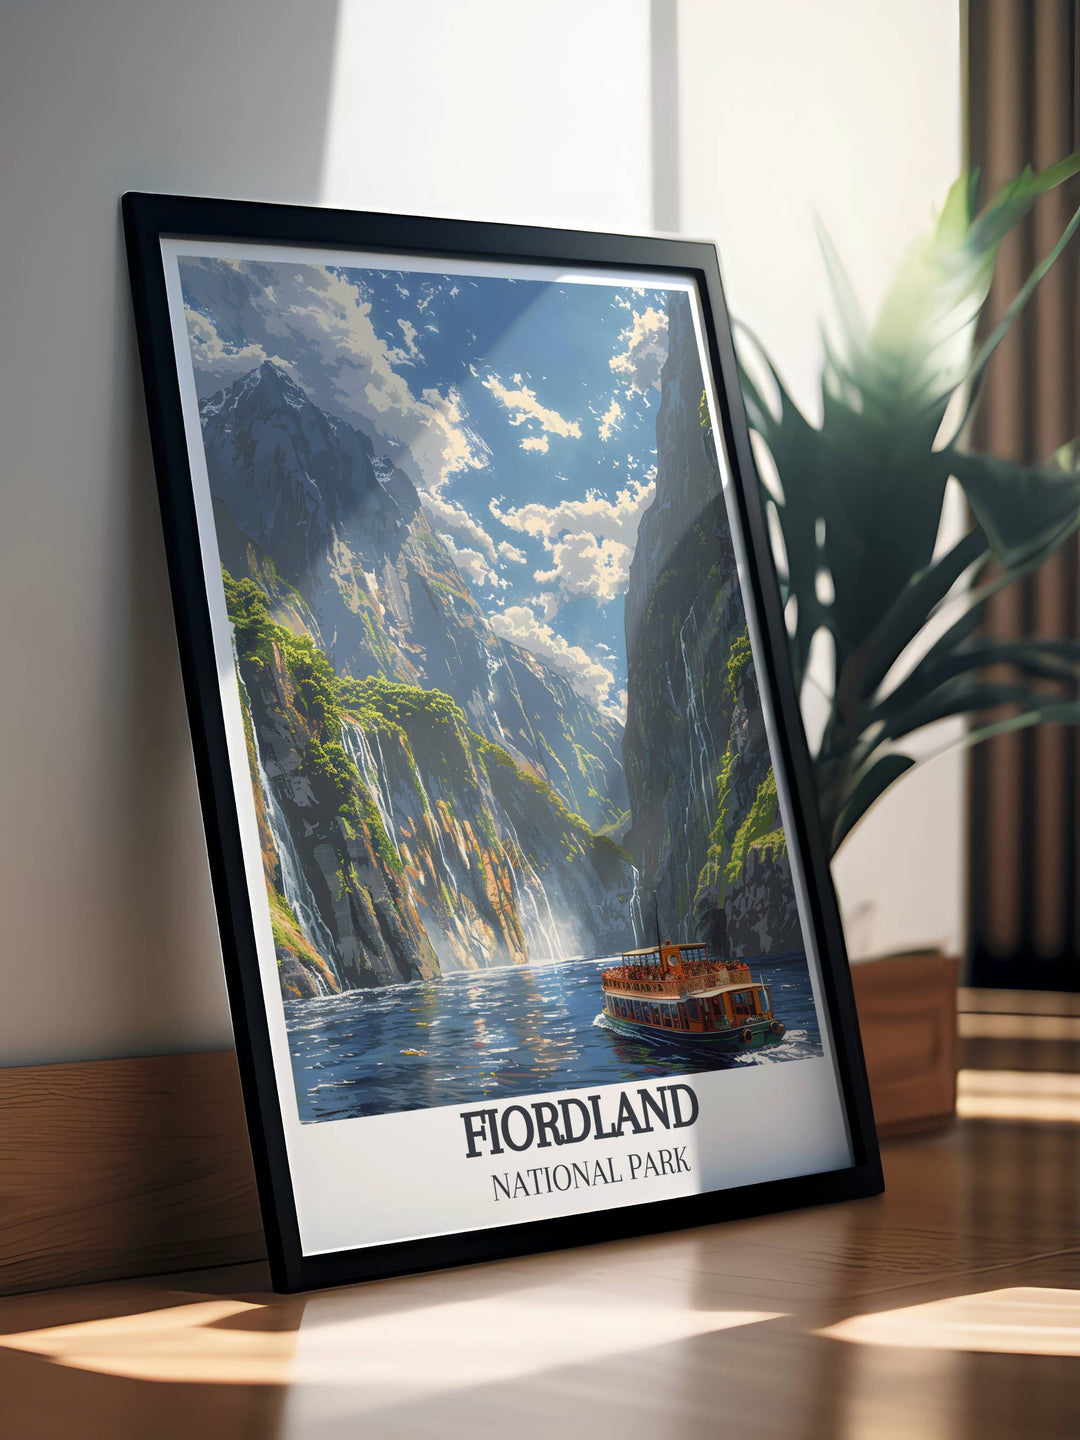 Wildlife of Milford Sound, featuring native birds in flight against a backdrop of dense rainforest, artistically rendered in this print.